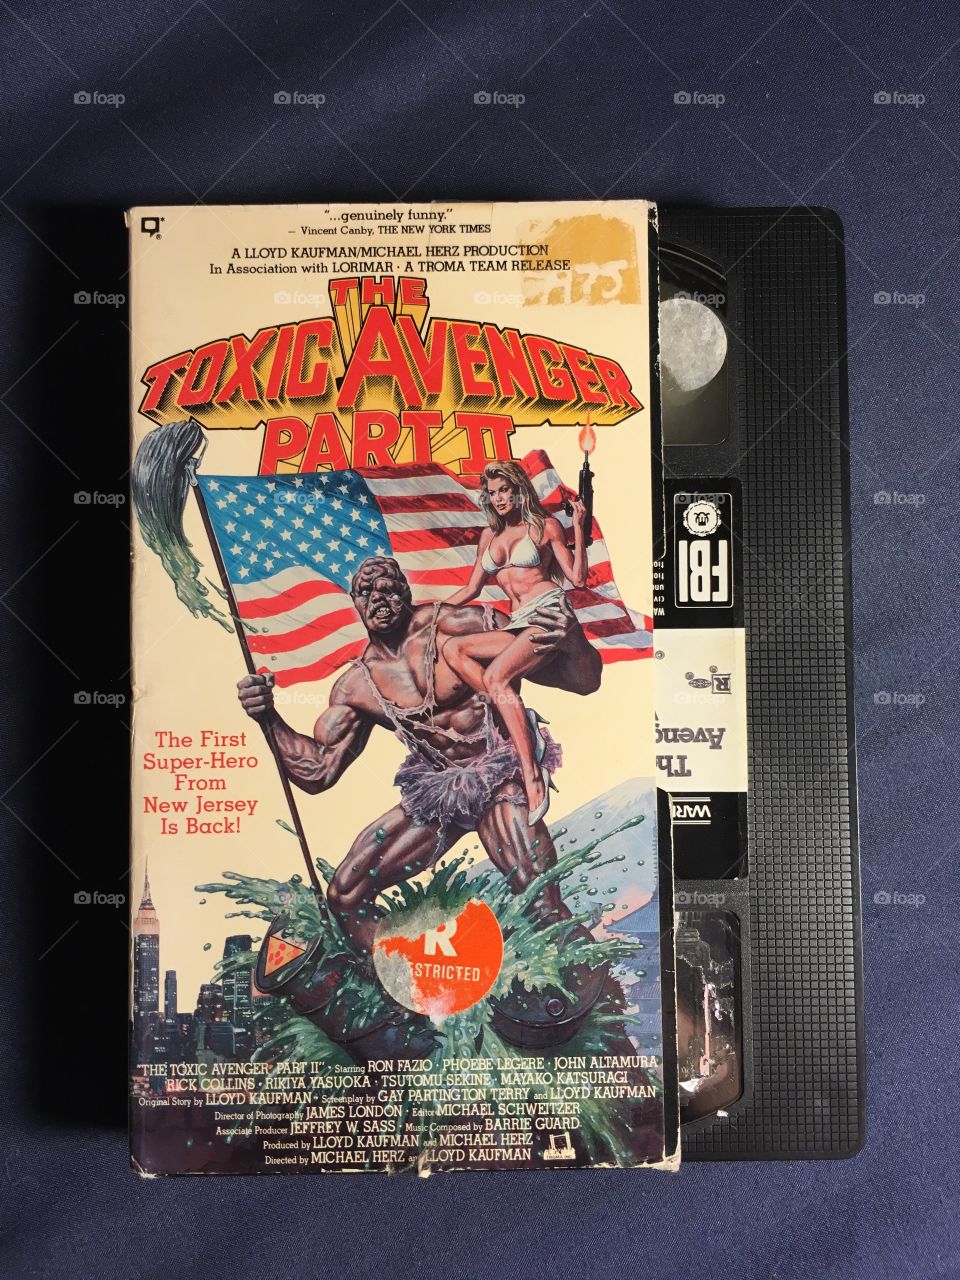 The Toxic Avenger Part 2 VHS Movie